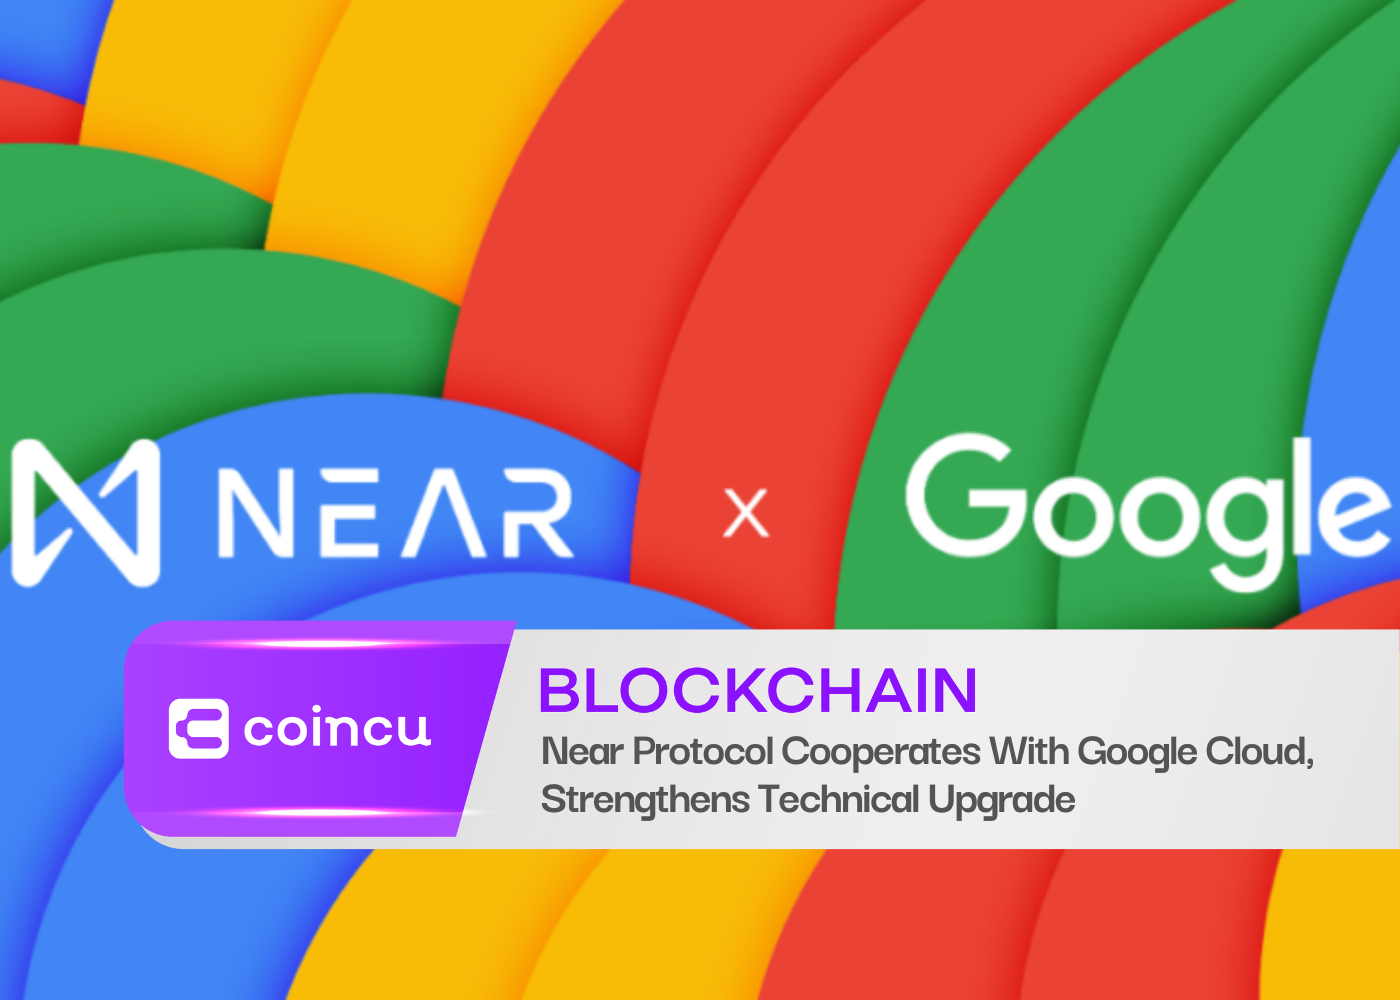 Near Protocol Cooperates With Google Cloud, Strengthens Technical Upgrade